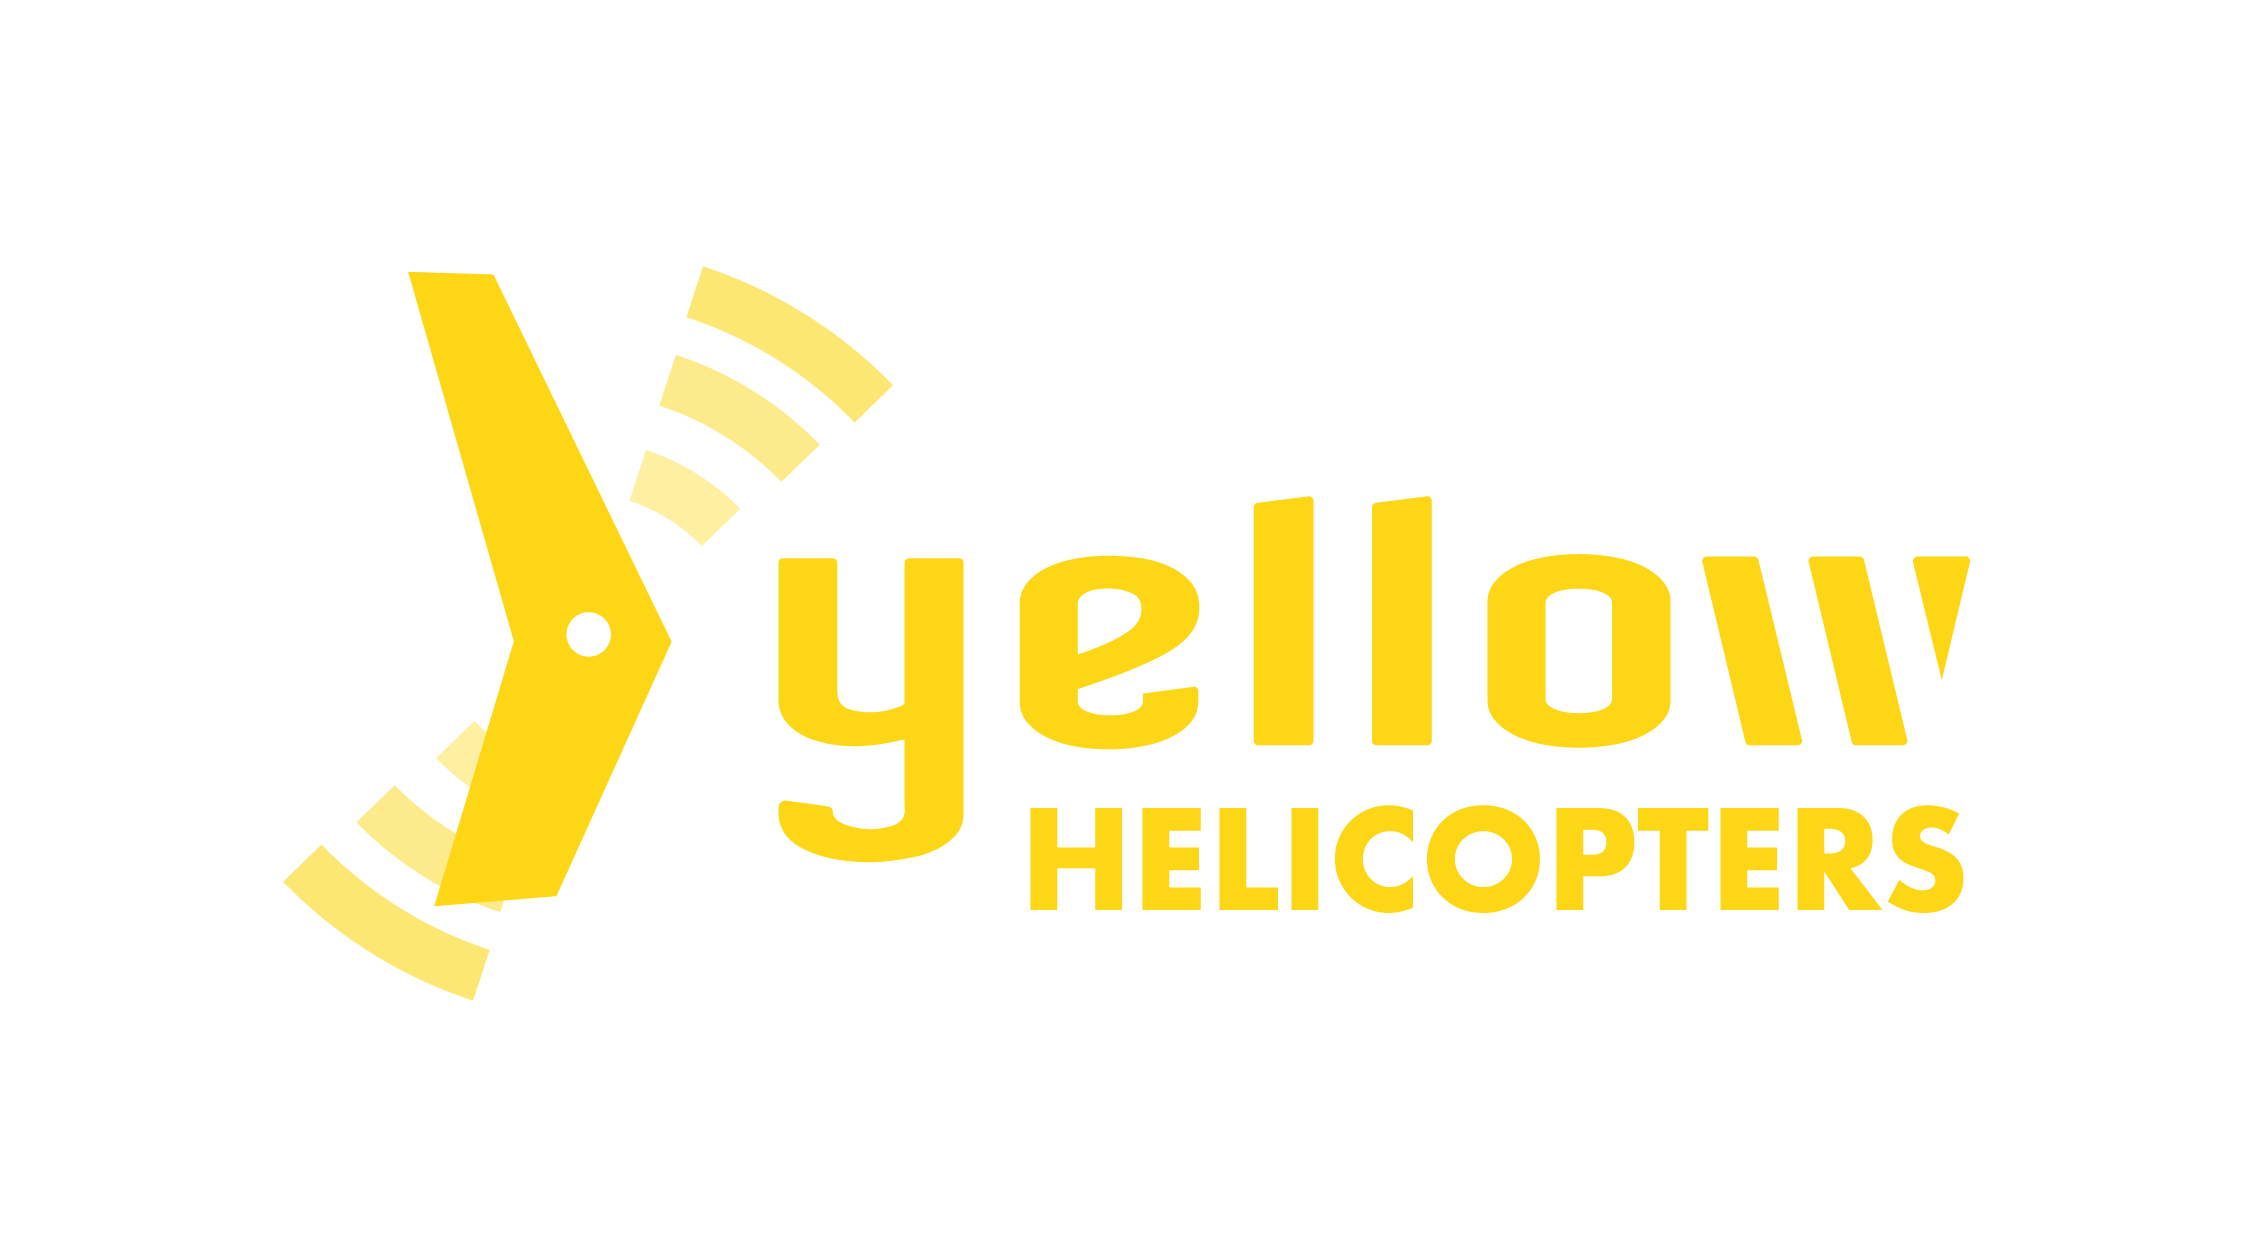 Yellow Helicopters